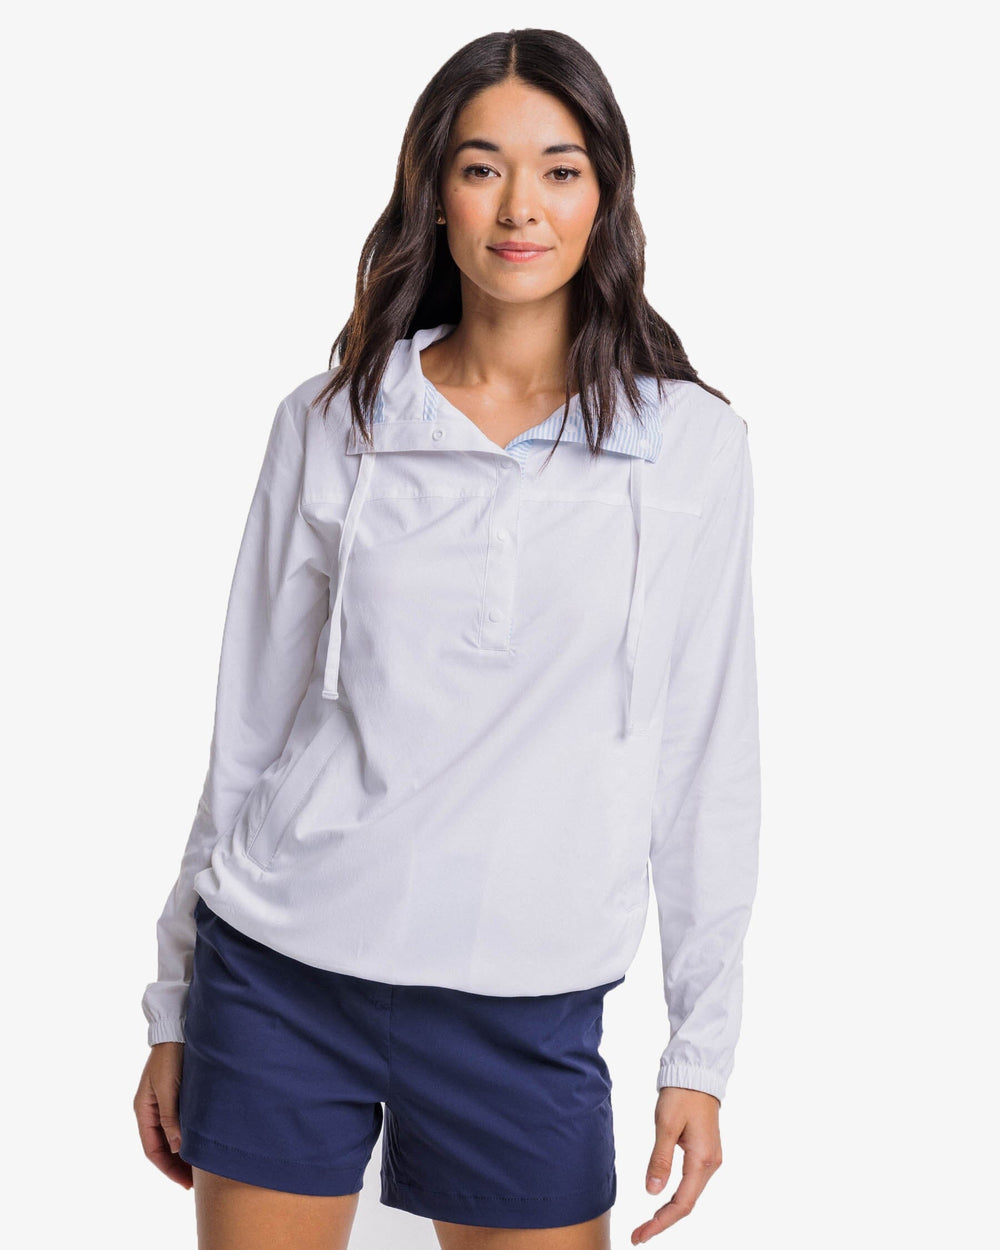 The front view of the Southern Tide Calie Pop Placket Popover by Southern Tide - Classic White